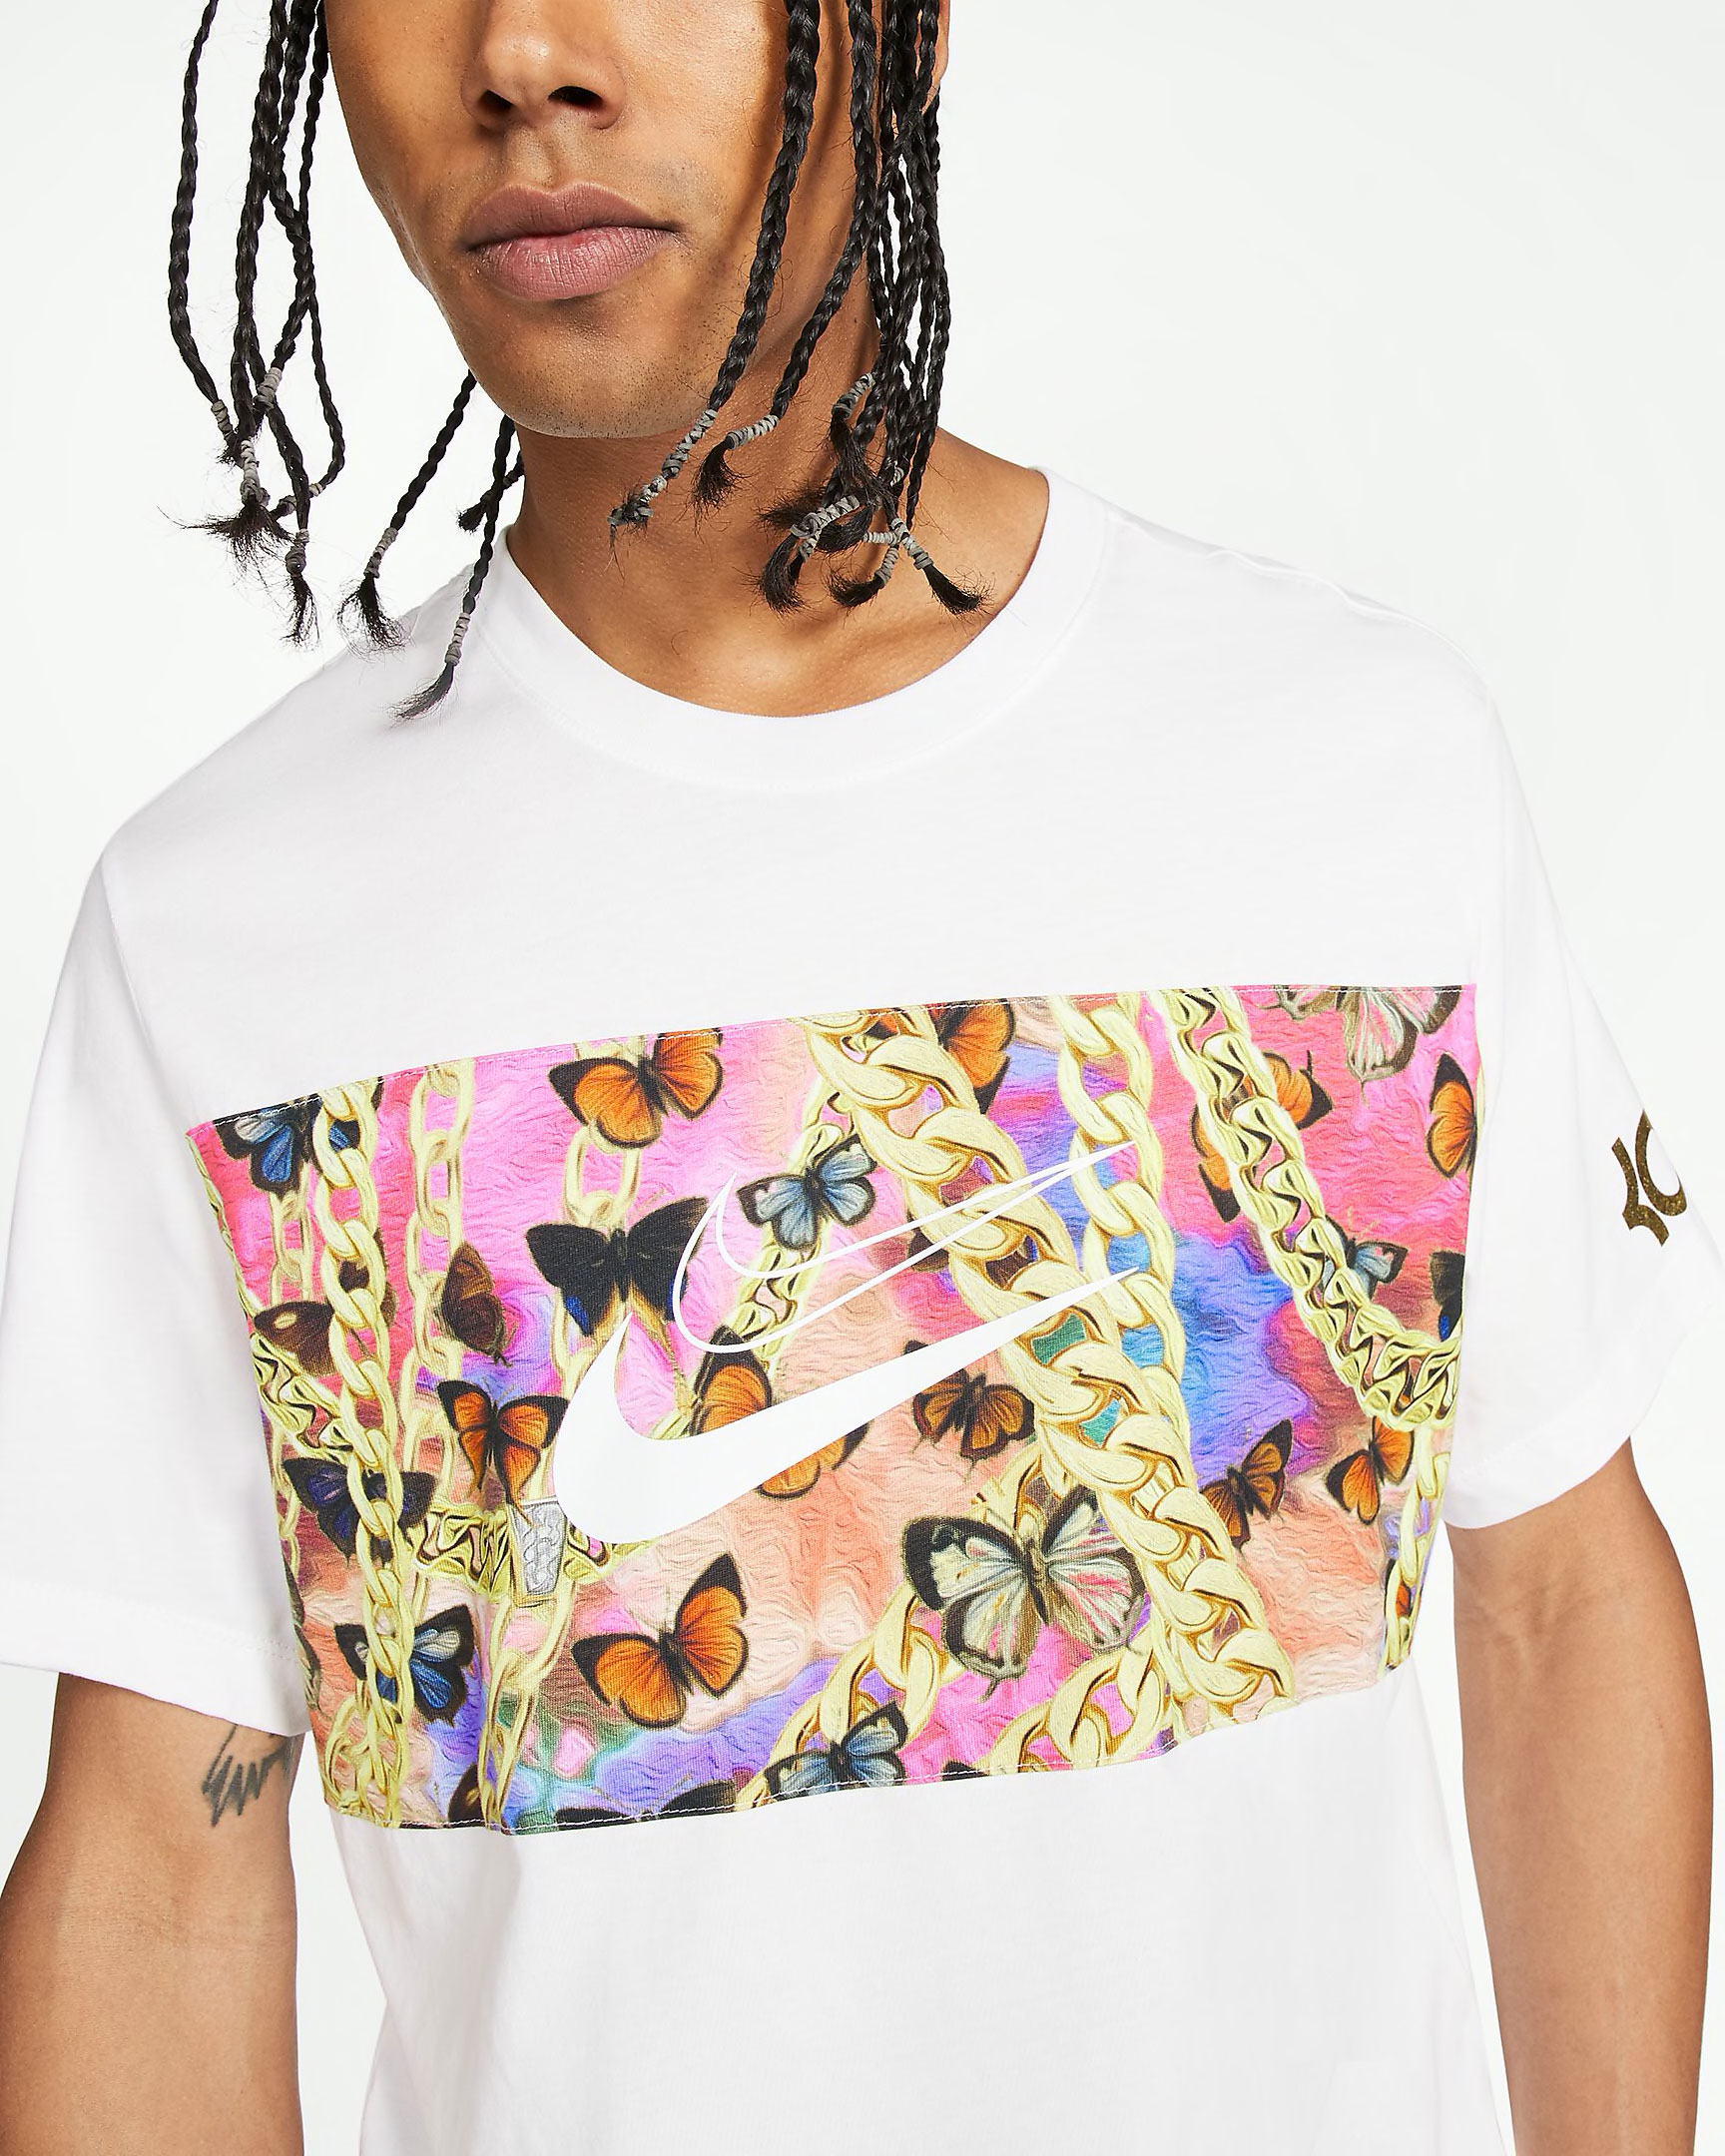 nike-kd-13-hype-butterflies-and-chains-shirt-1